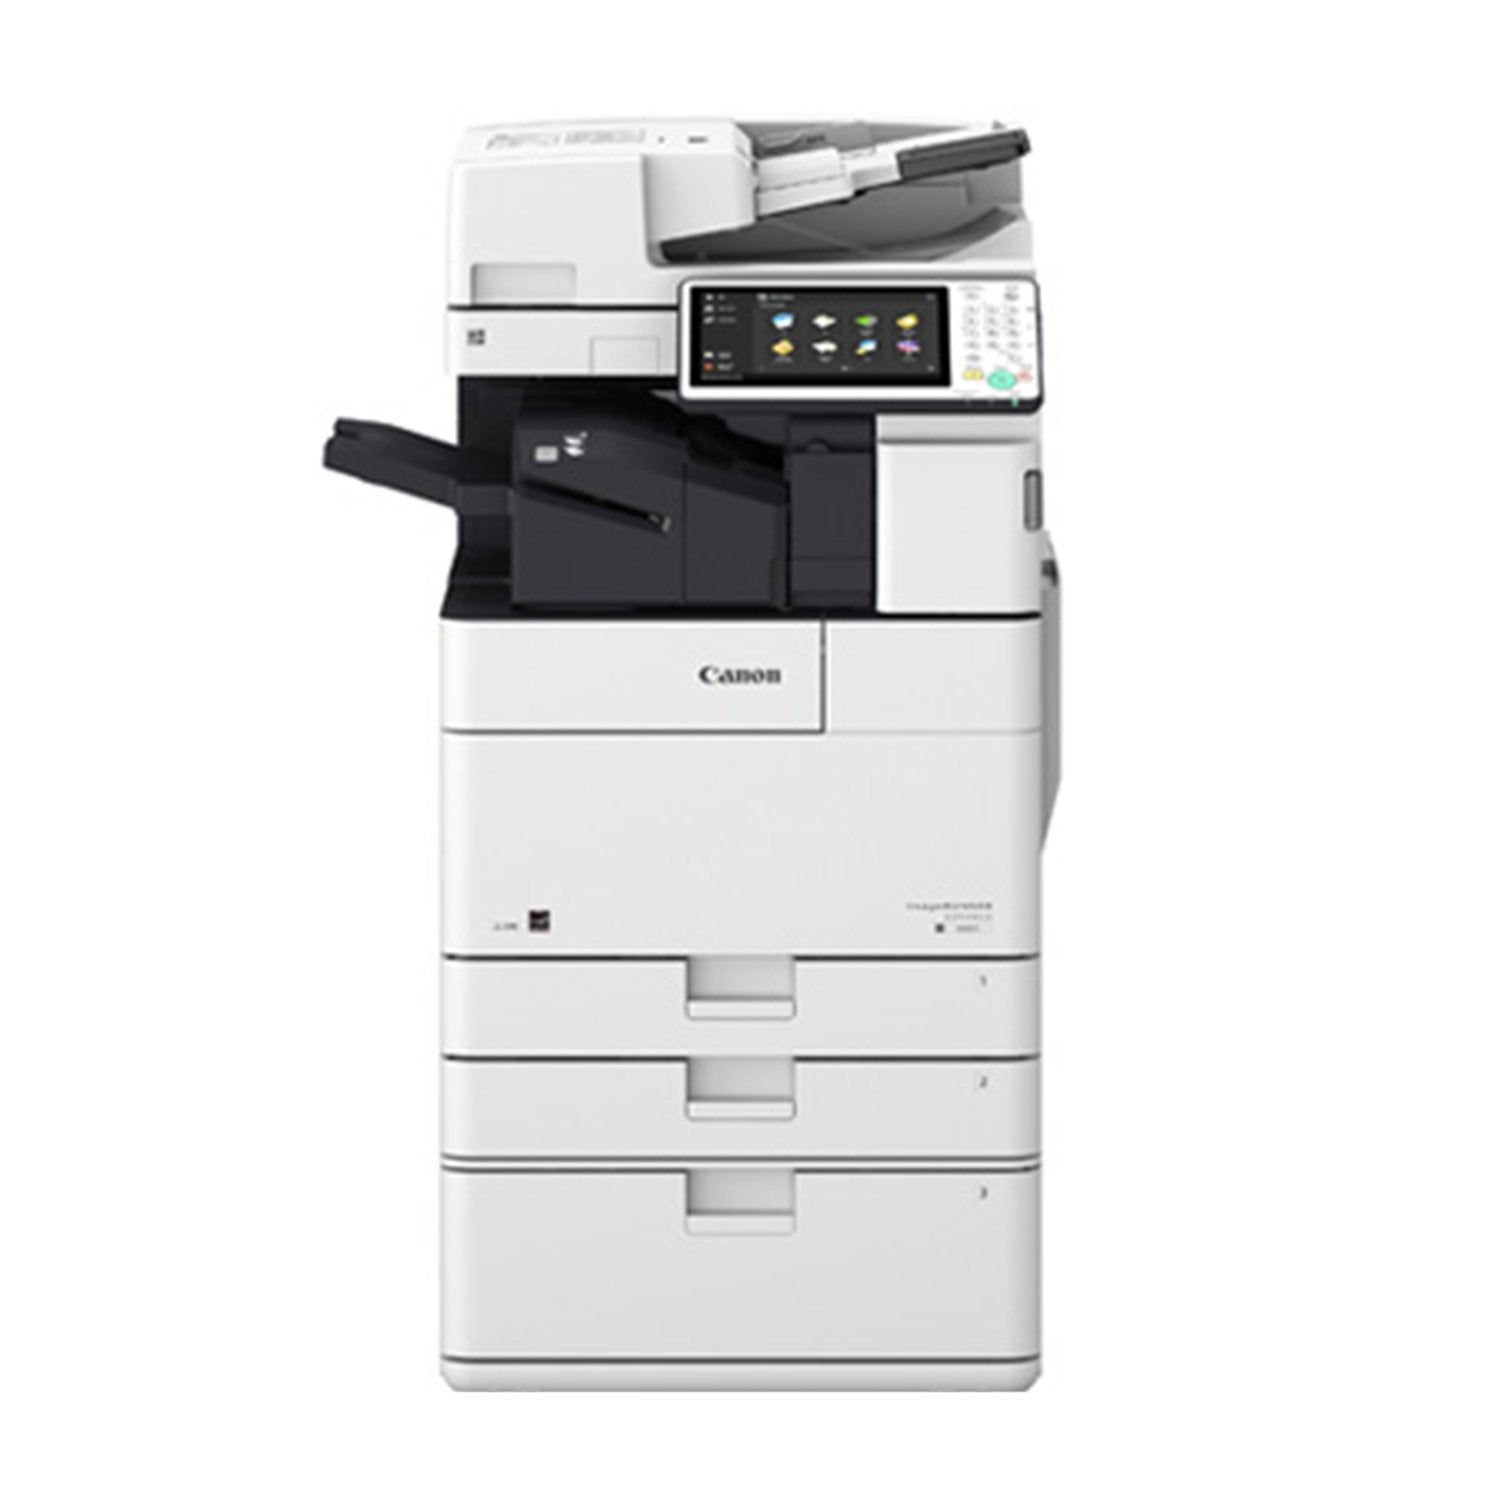 Absolute Toner Canon imageRUNNER ADVANCE 4551i Laser Multifunction Printer Copier For Office | IRA4551i Showroom Monochrome Copiers